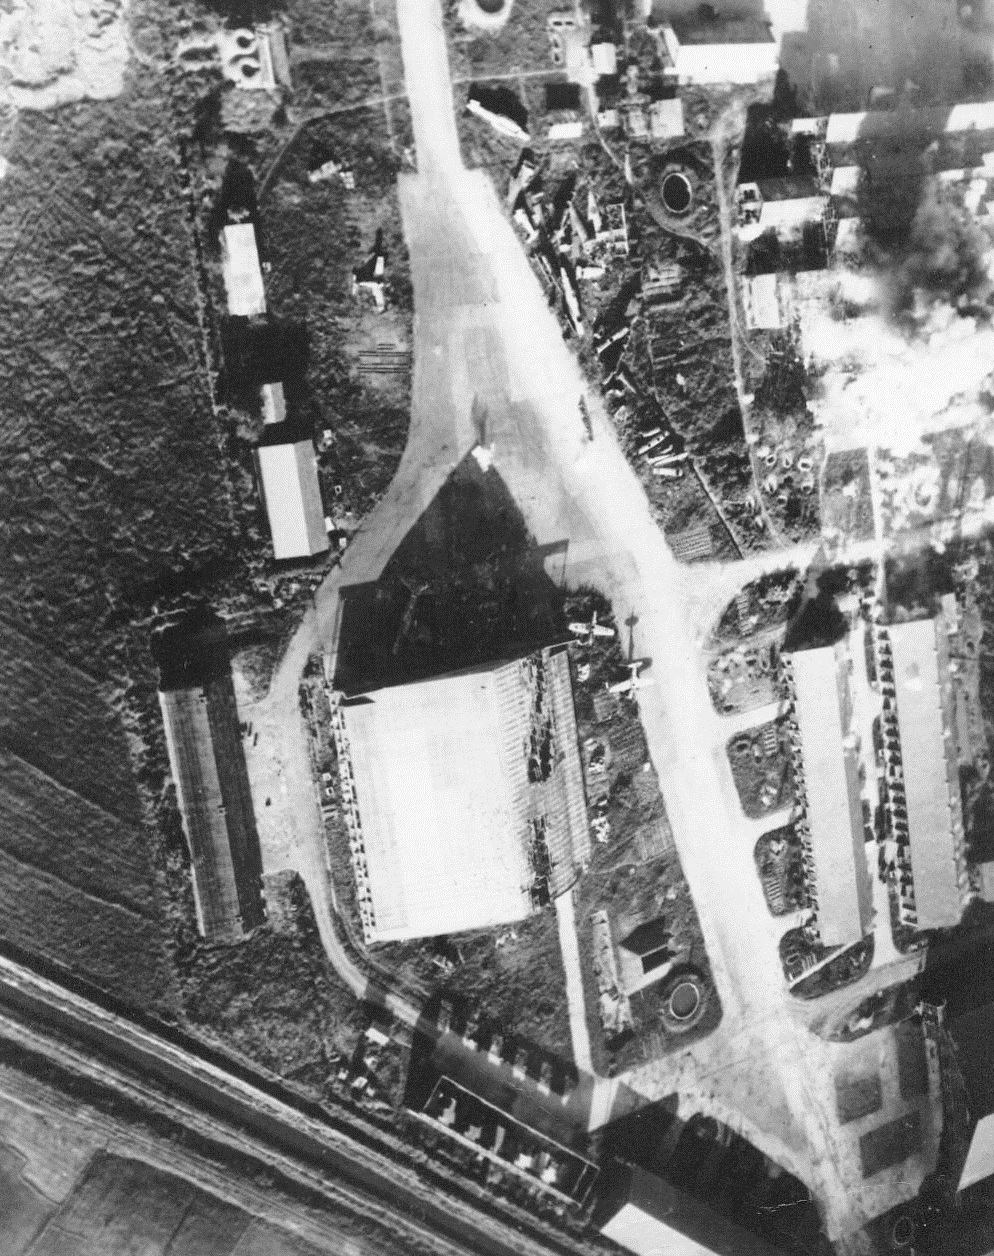 Fromosa Struck By U.S. Fleet, 10/18/1944. Formosa – Japanese planes with the rising sun on their wings are caught on the ground at Kagi, Formosa, by warplanes of the U.S. Pacific Fleet’s fast carrier task force. Large hangar shows effects of attacks. Industrial sheds in upper left billow clouds of smoke as bombs explode from warcraft just pulling out of its dive. More than 97 Jap aircraft were destroyed on the ground during this day of raids on Formosa 10/18/44 Credit Line (ACME);